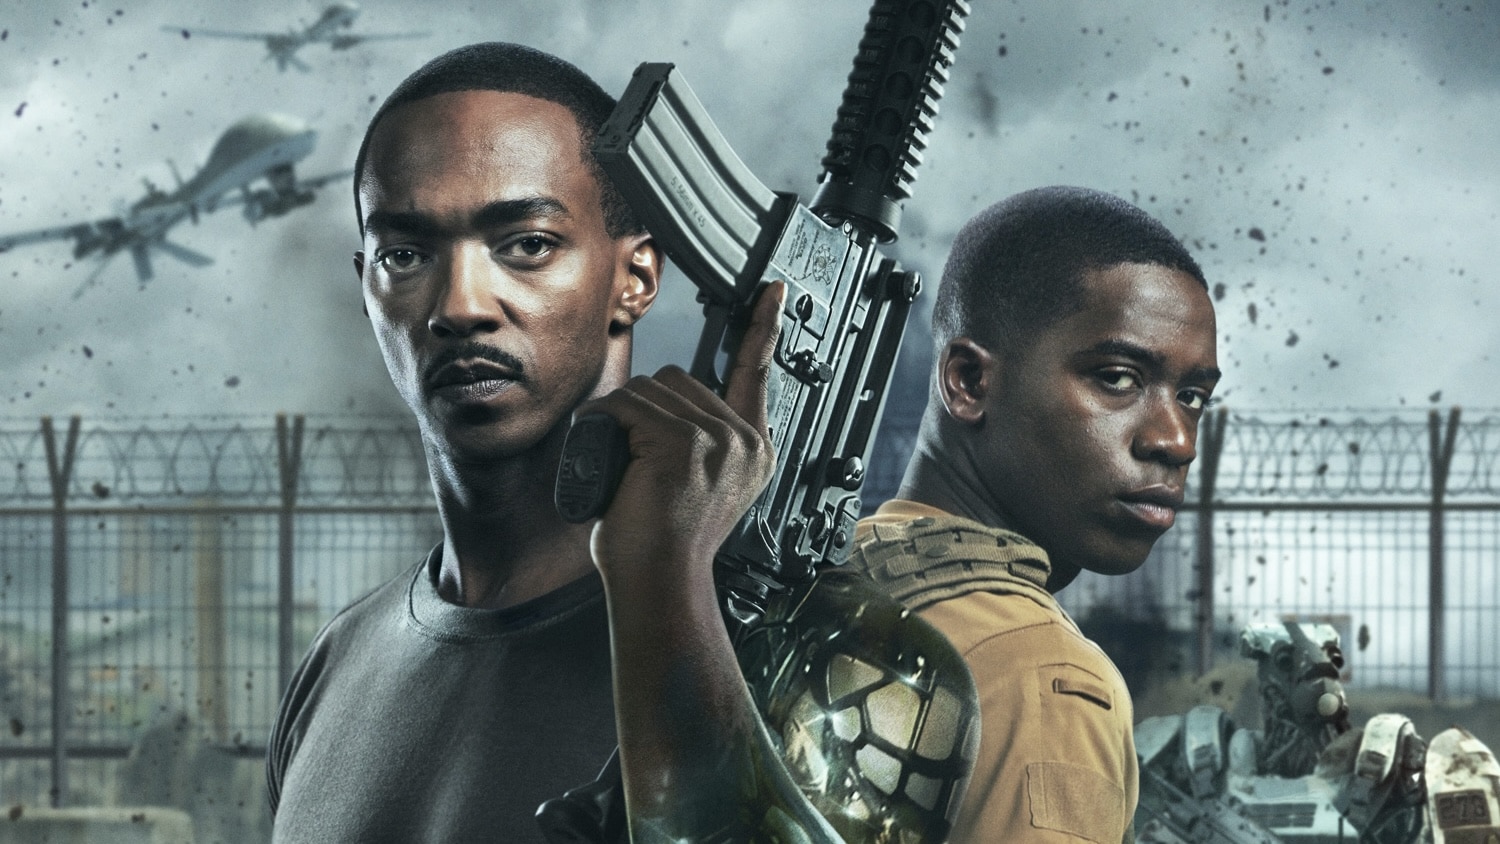 Trailer: Outside the Wire (2021)